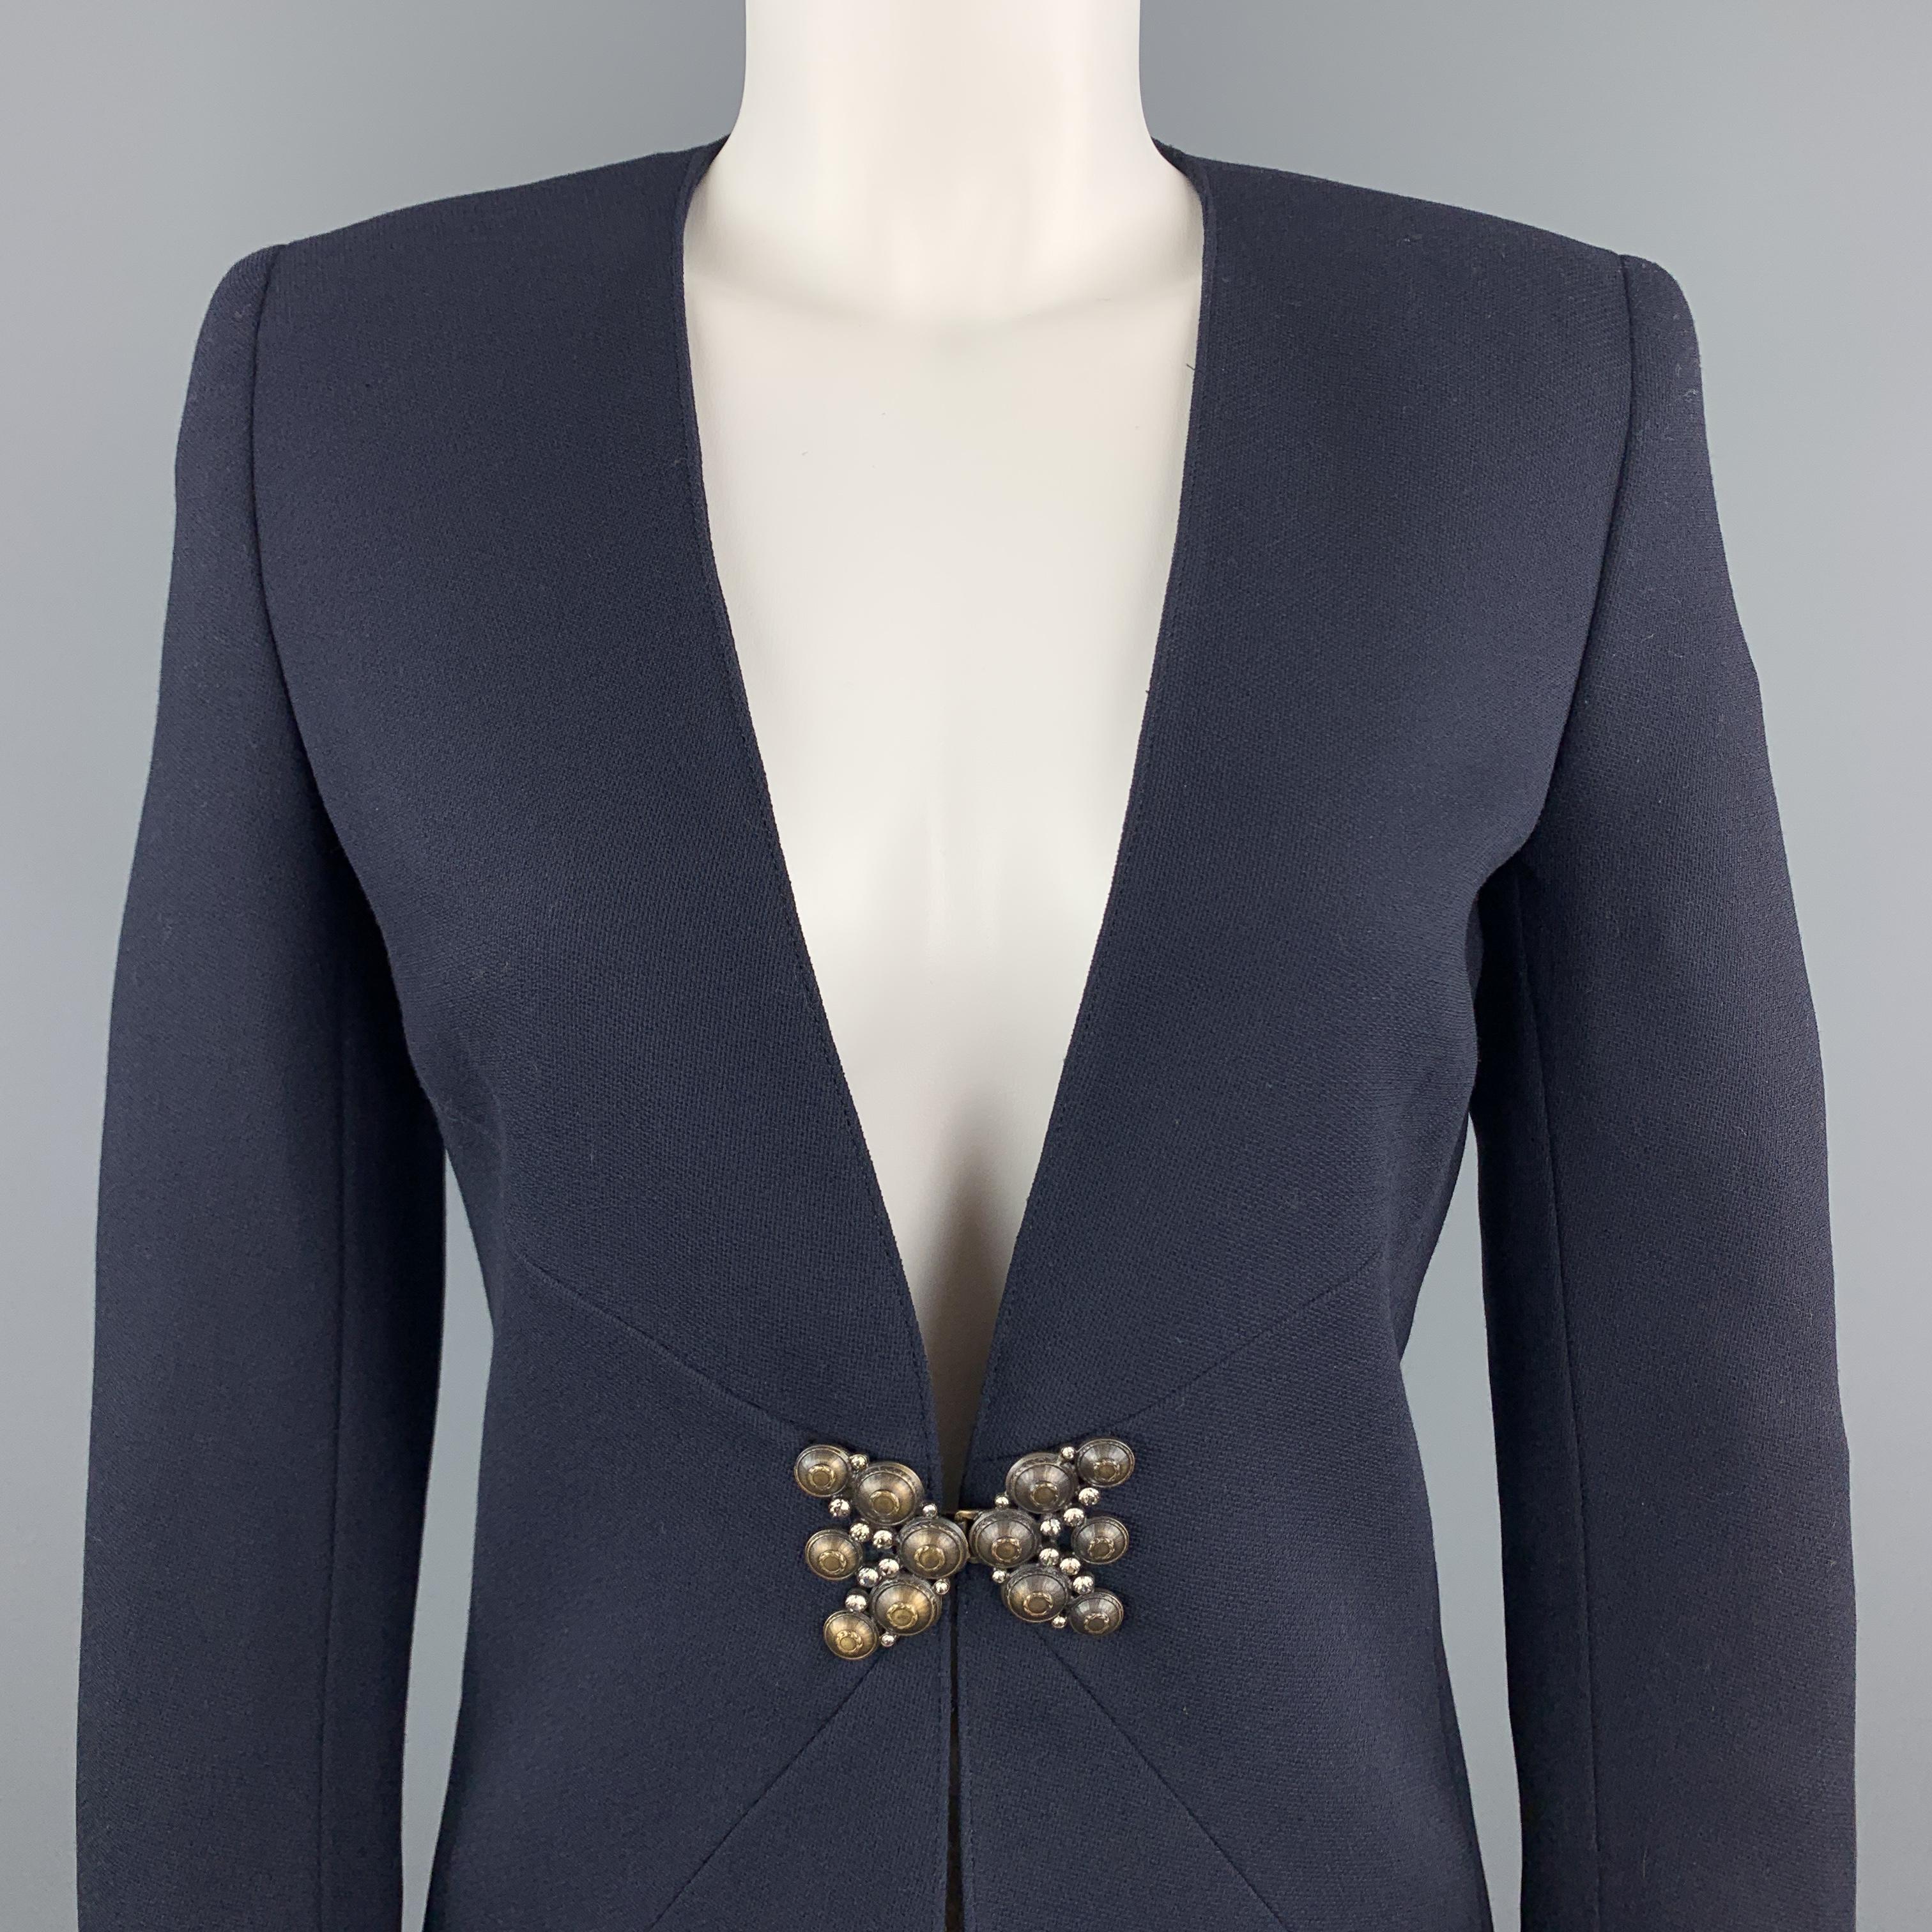 Vintage MISS V VALENTINO jacket comes in navy blue woven wool with a collarless V neck line, tailored silhouette, and antique gold tone hinge brooch closure with clear rhinestones. Made in Italy.

Excellent Pre-Owned Condition.
Marked: USA